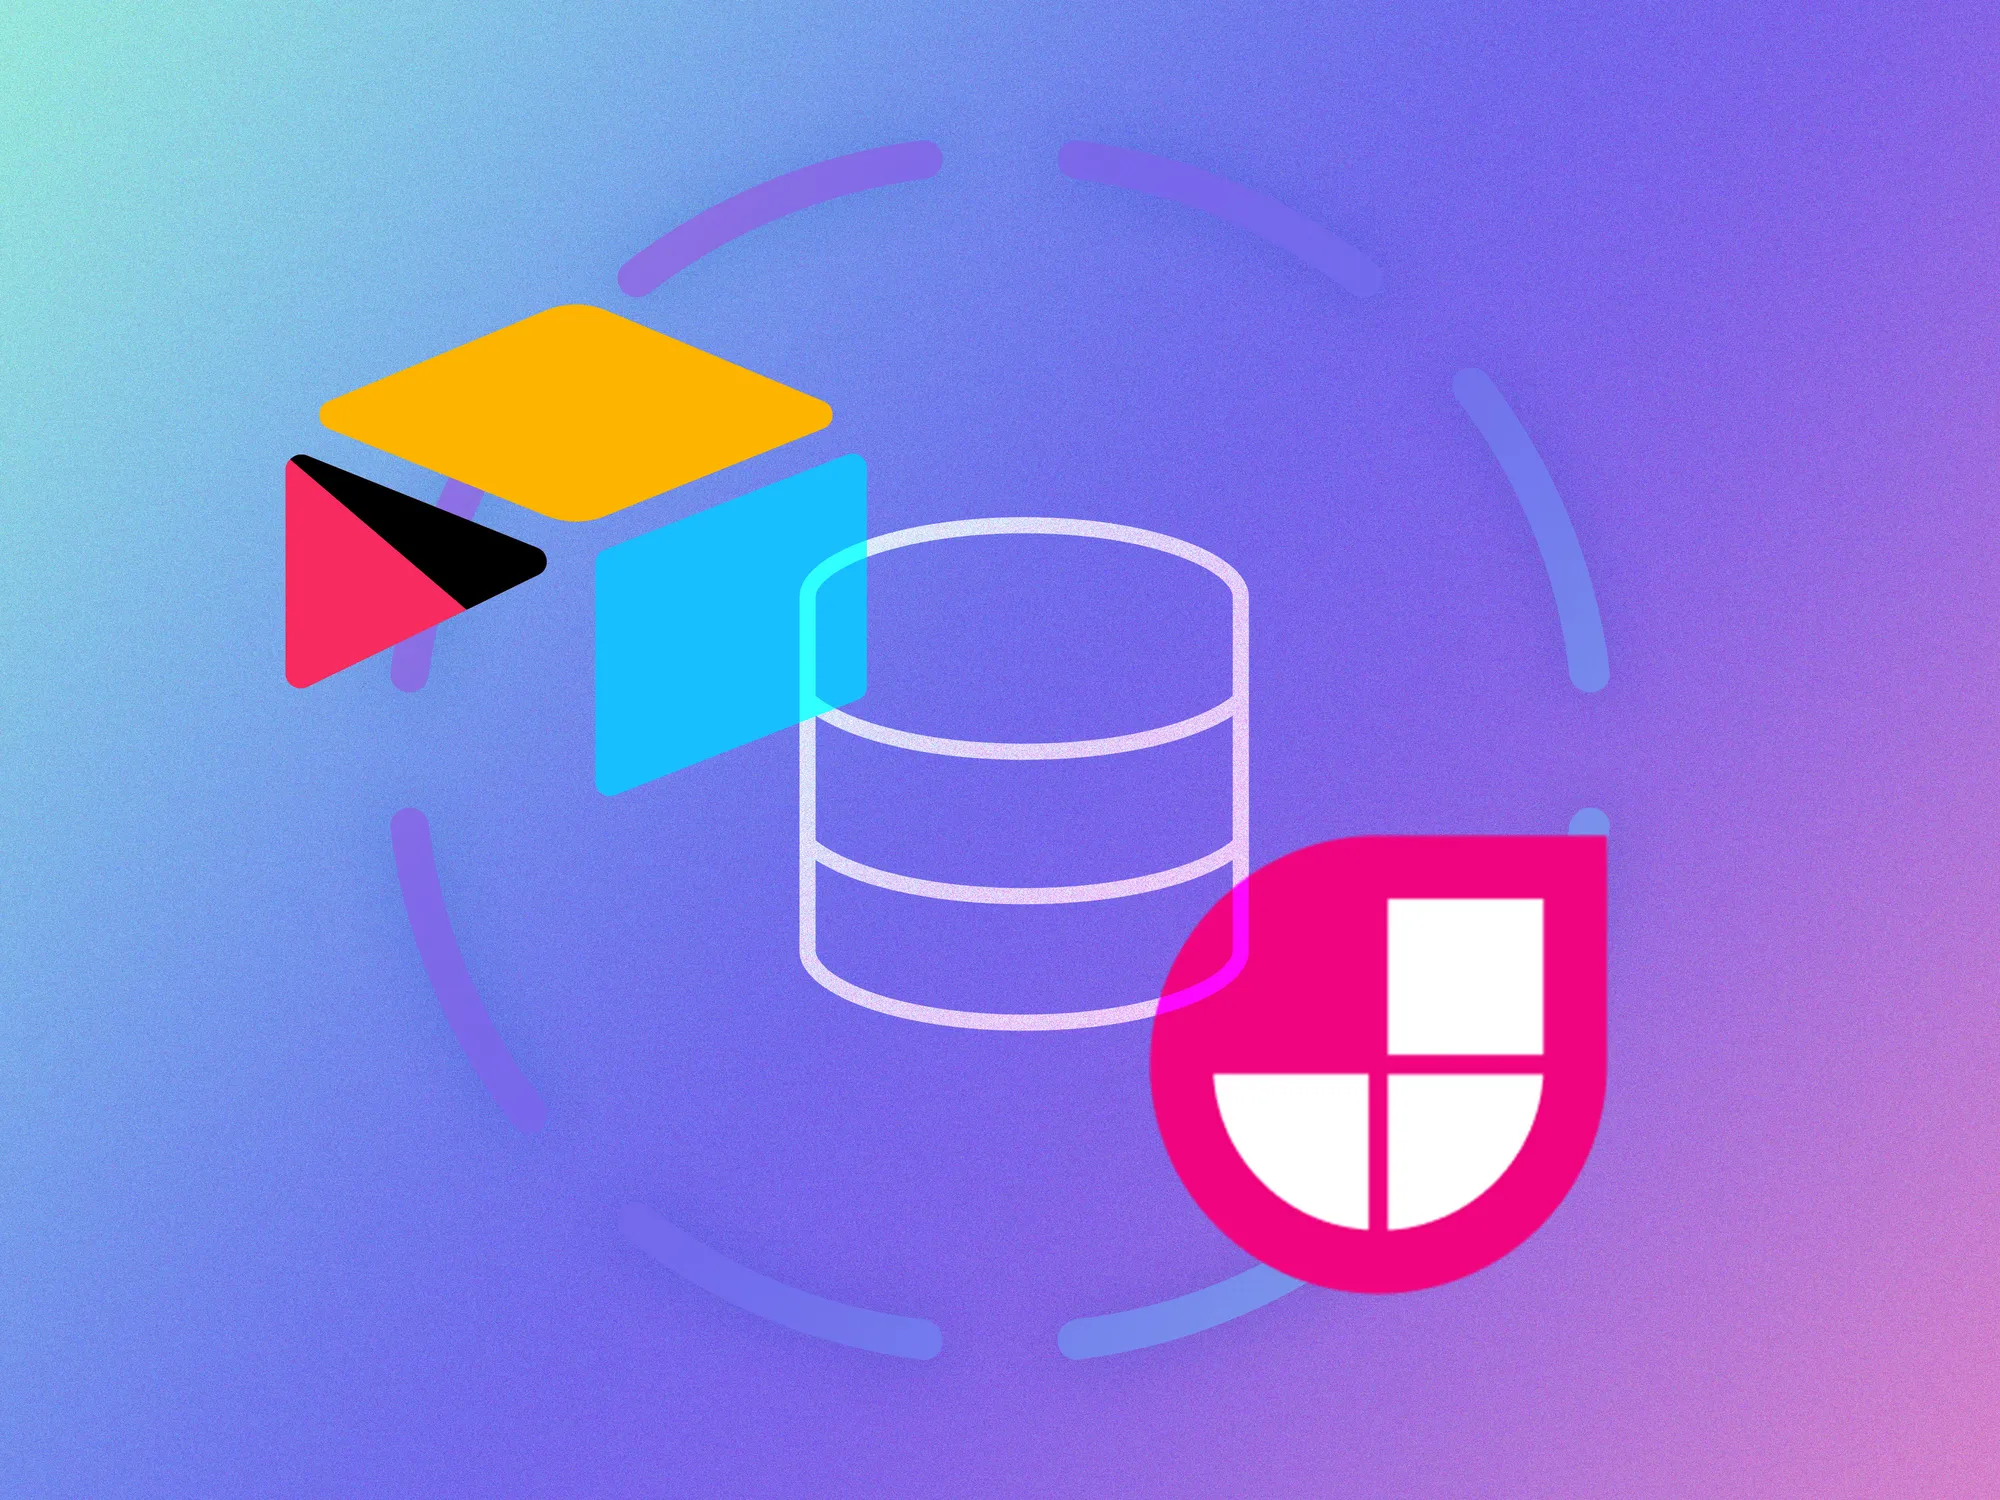 Illustration of Airtable and Jamstack logos with data icon.